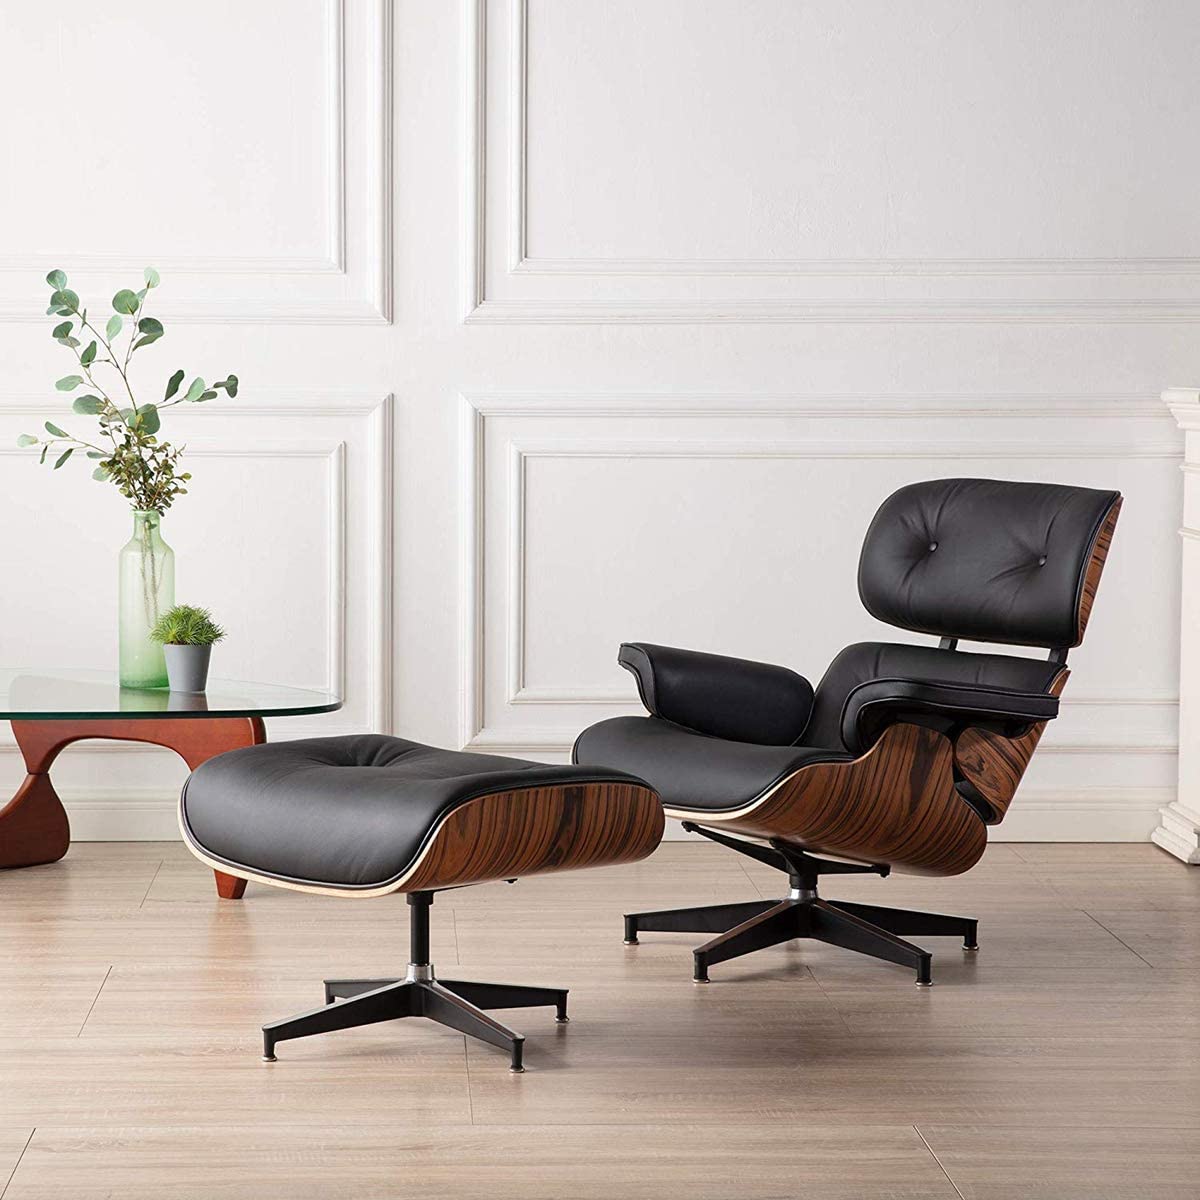 The Best Eames Chair Replica [May 2020] - Comfy Zen